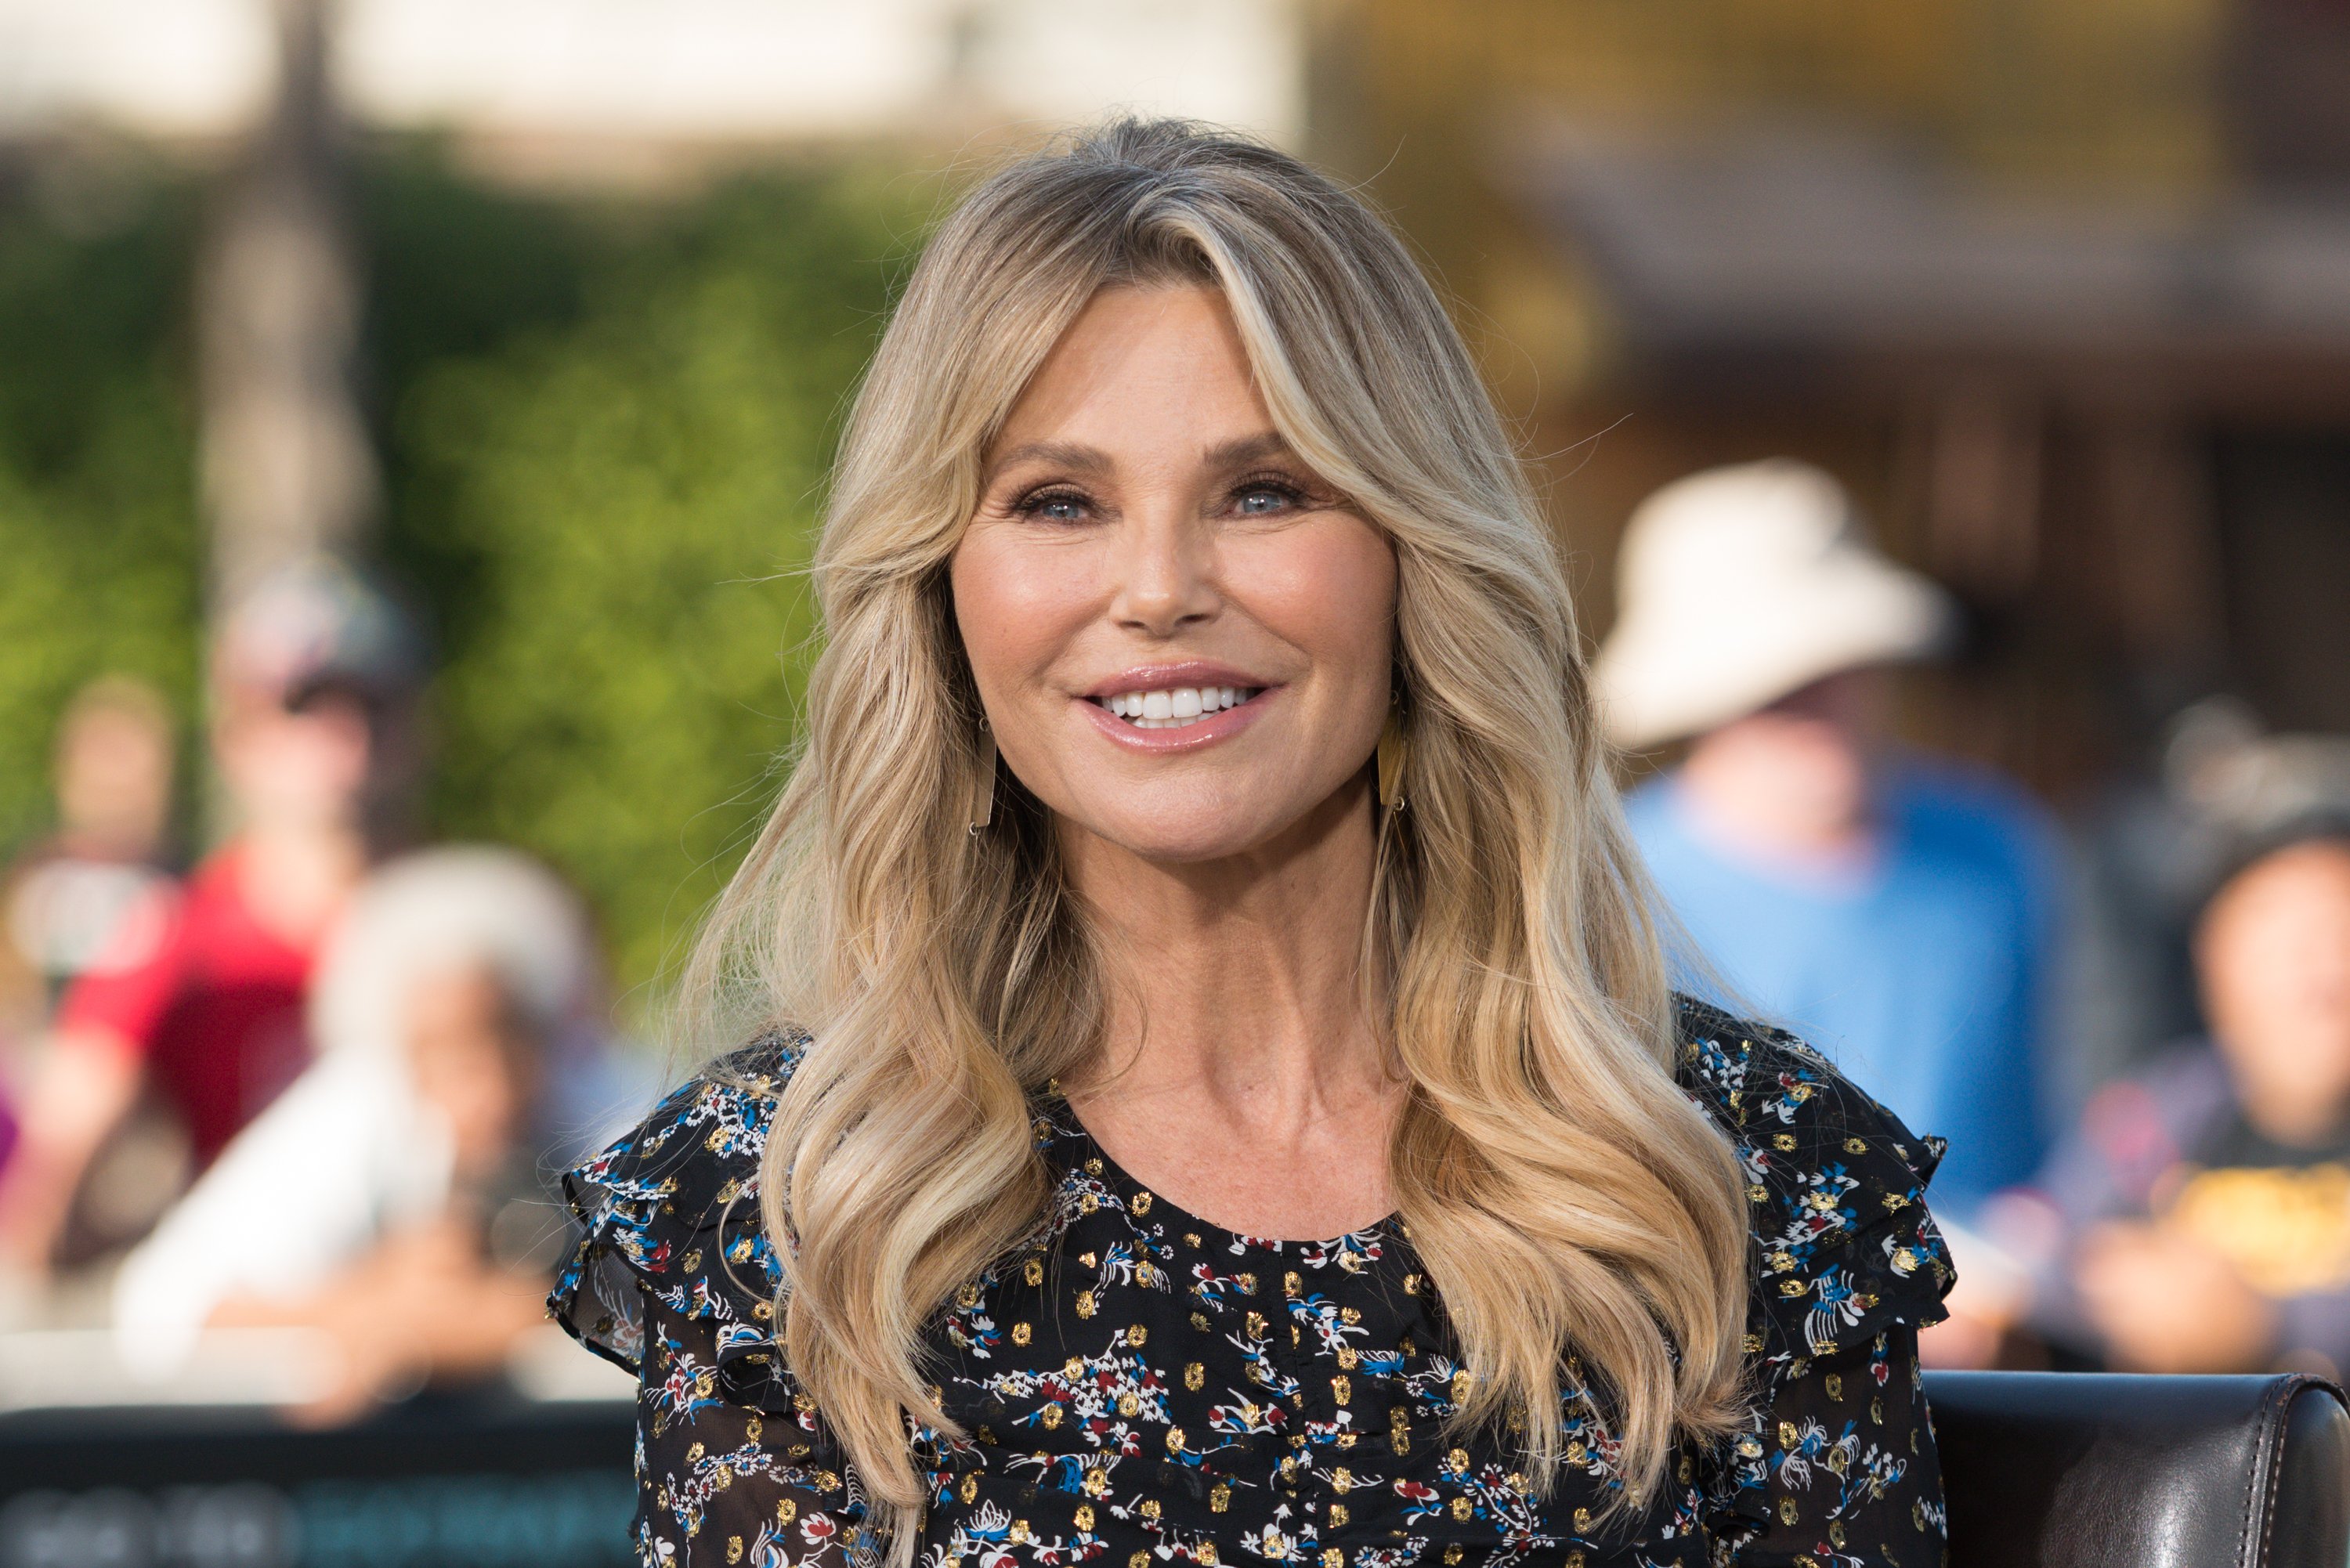 Christie Brinkley visits "Extra" at Universal Studios Hollywood on January 18, 2018 in Universal City, California | Source: Getty Images